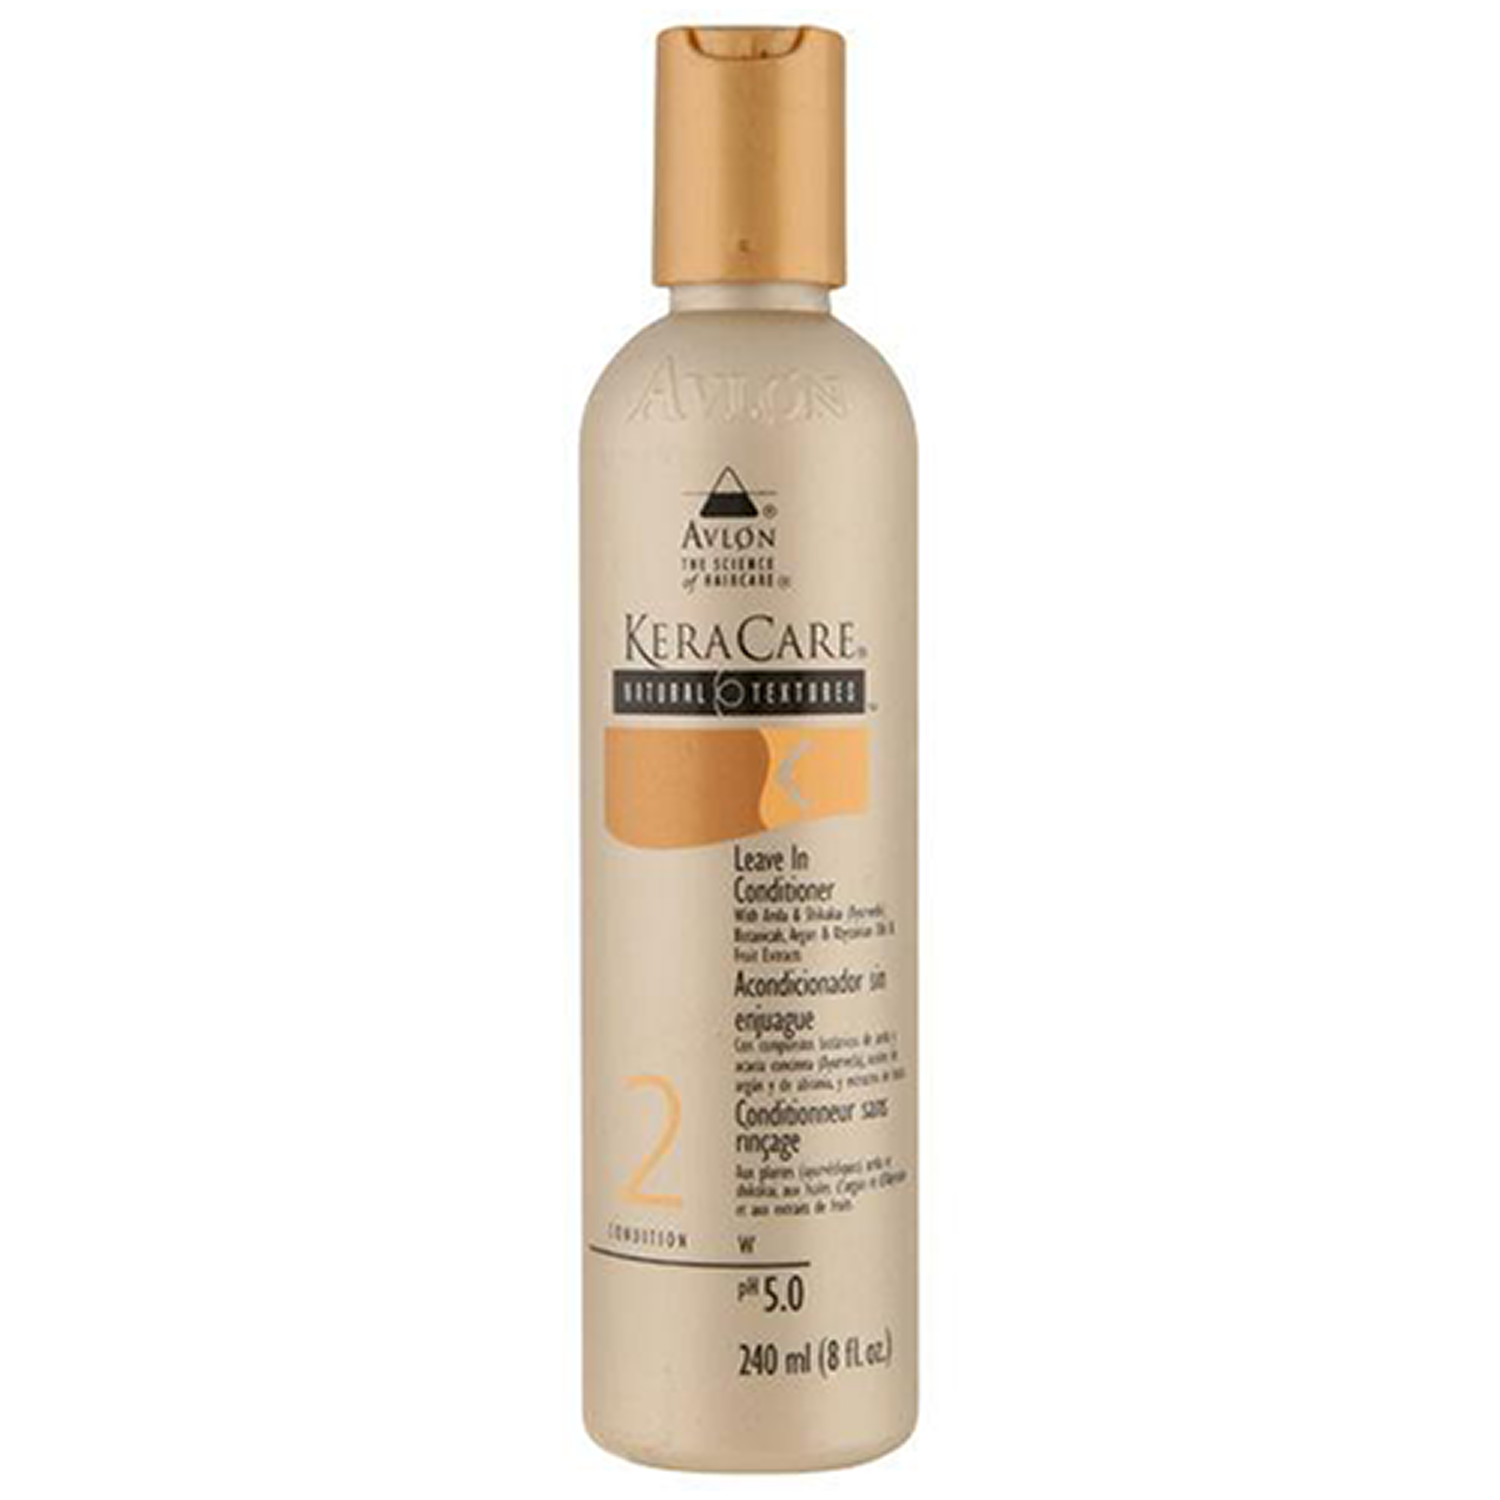 KeraCare Natural Textures Leave In Conditioner (240g) - aqnline